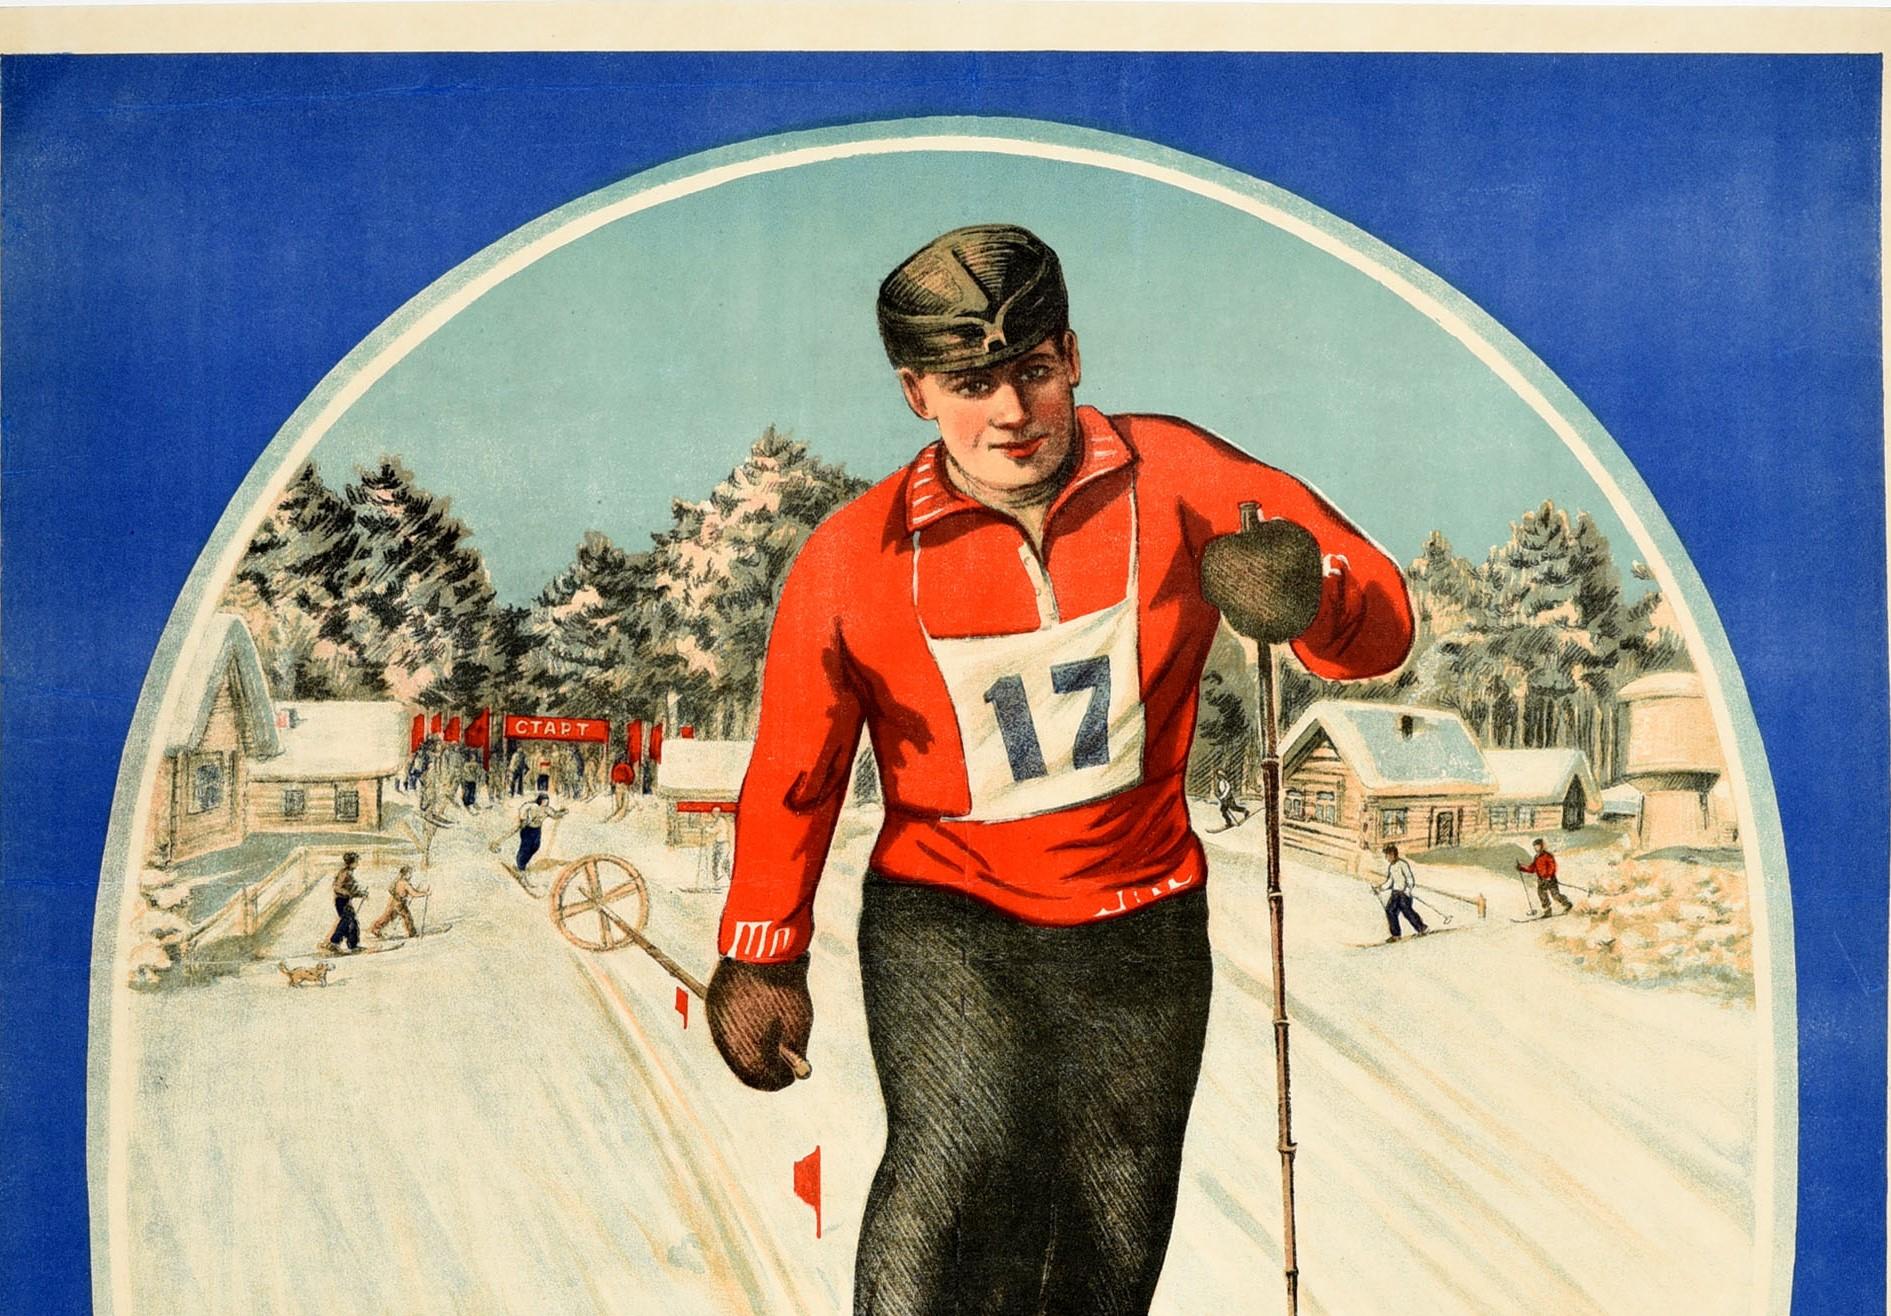 Original vintage Soviet winter sport poster: ???????? ???????? - ?? ???? / Rural Youth on Skis! Great illustration depicting a man in a red ski jacket with a number 17 bib skiing towards the viewer on a ski track from a banner marked Start